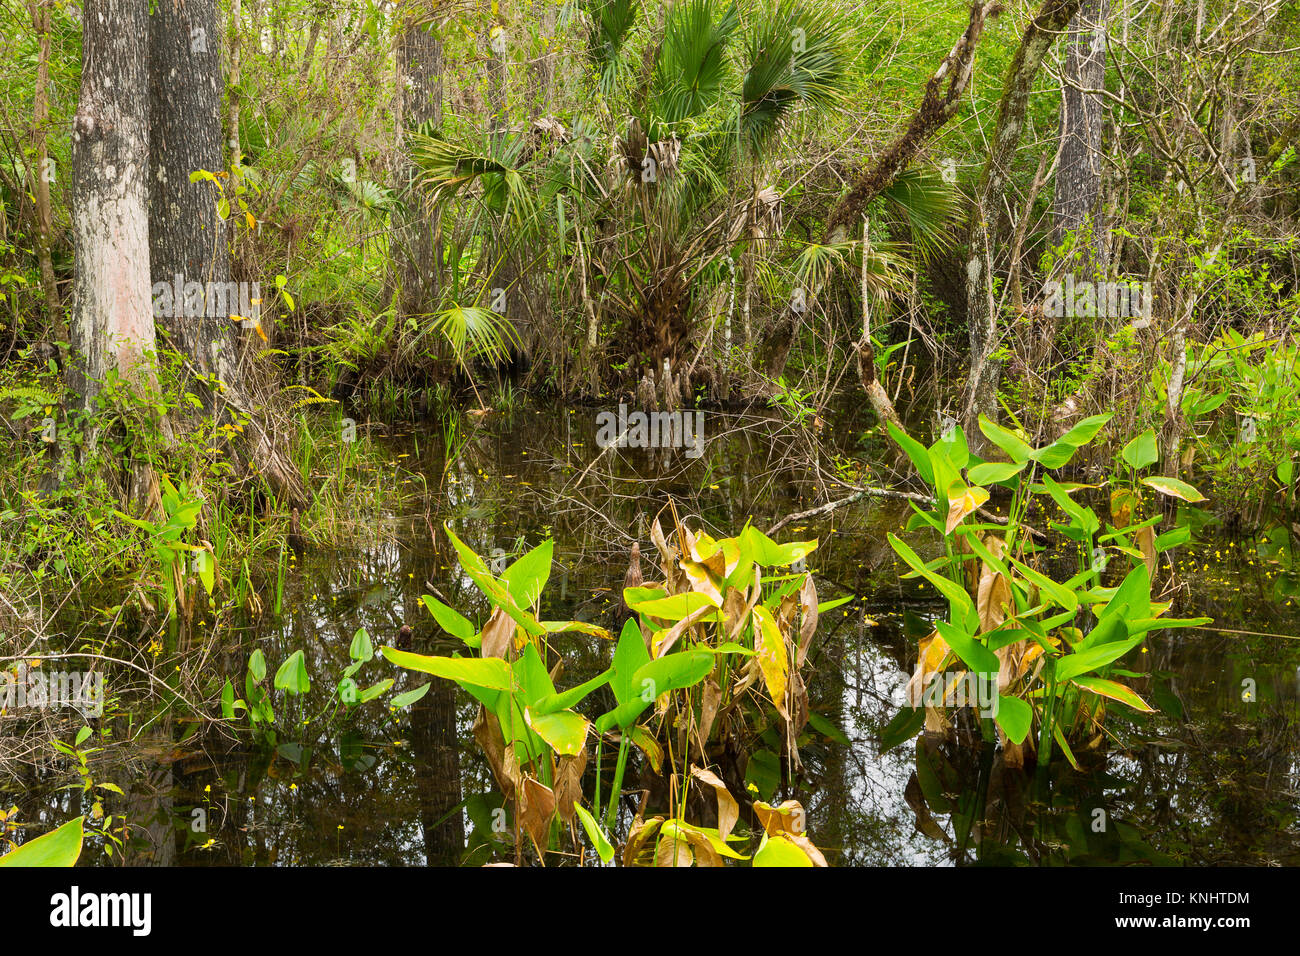 Pickeral weed and sabal palmetto grow in a swamp of Fakahatchee Strand Preserve State Park in Florida. USA Stock Photo